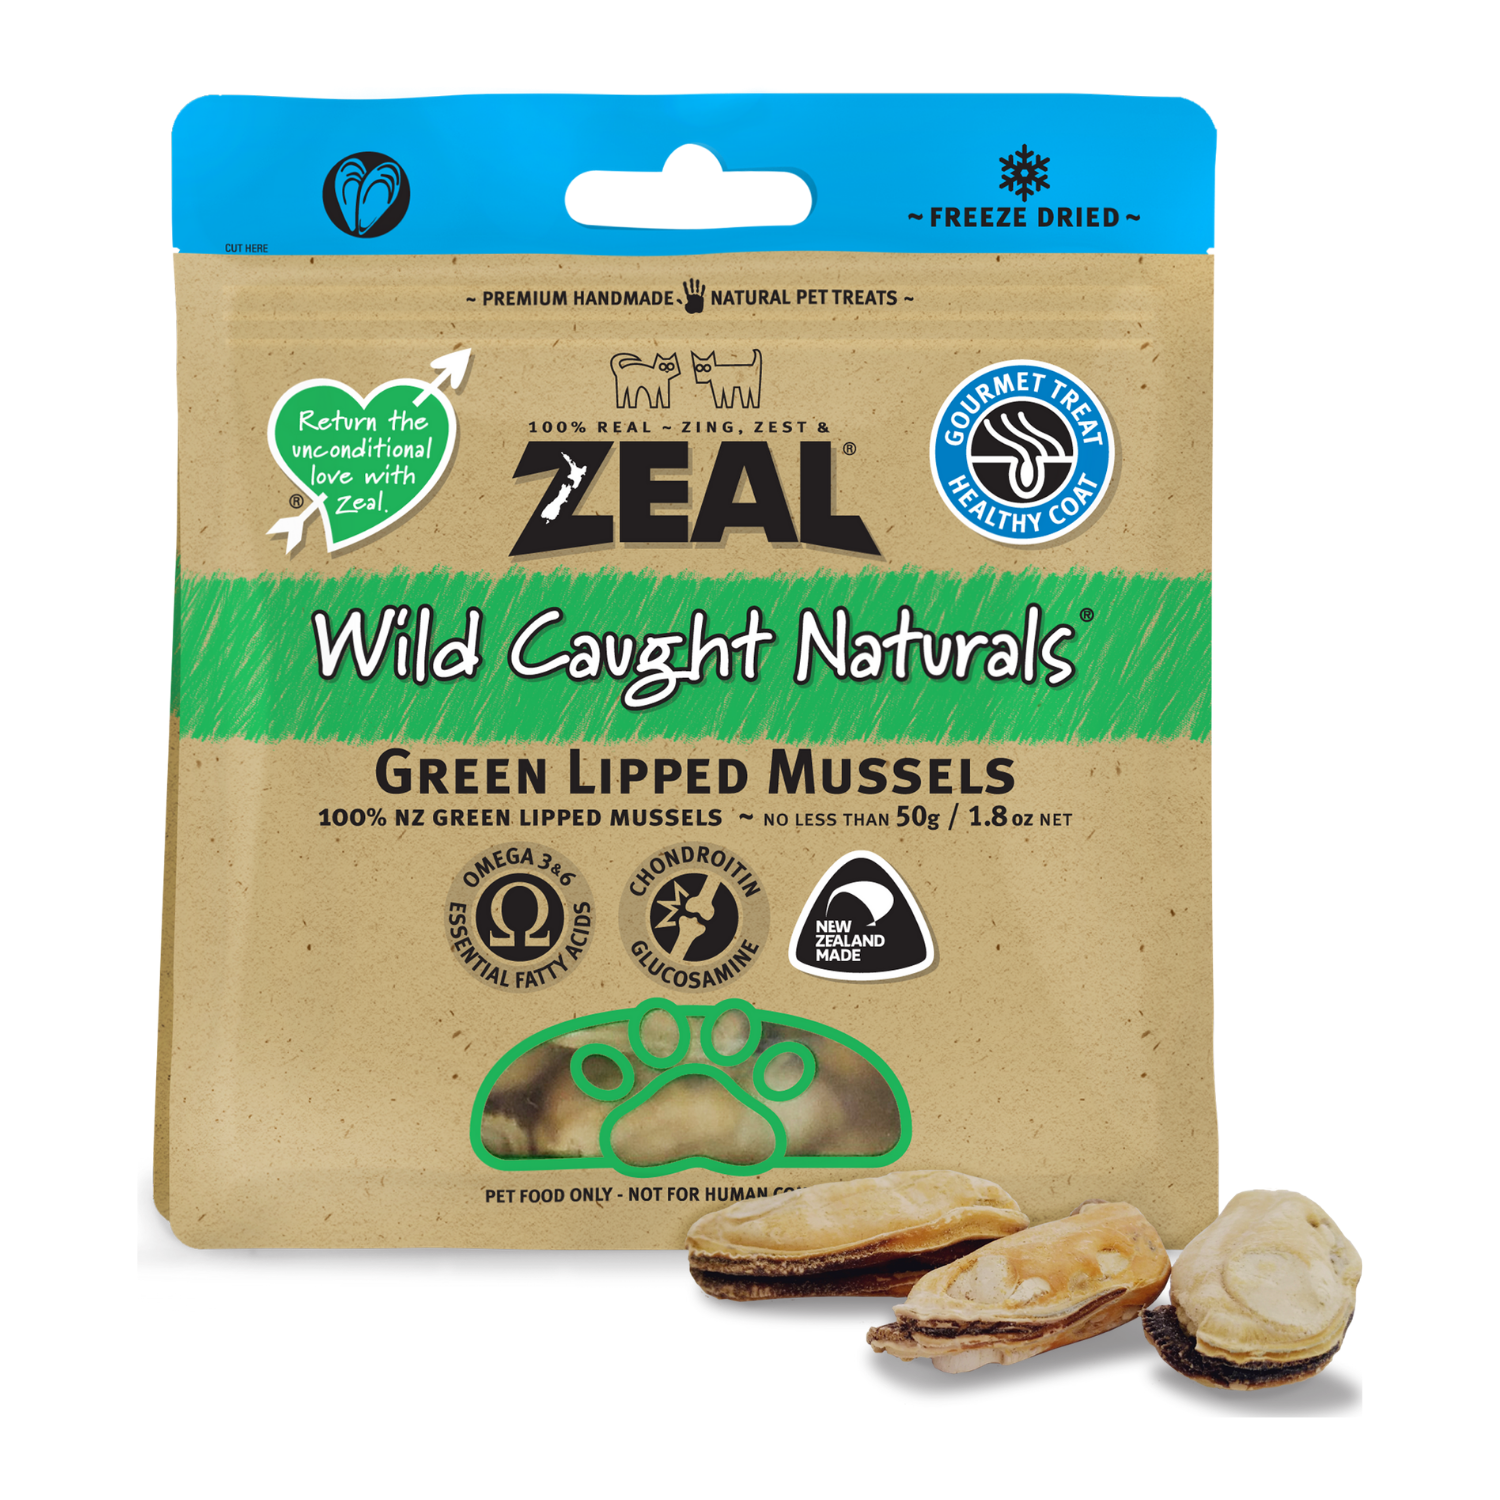 [DISCONTINUED] Zeal Wild Caught Naturals Green Lipped Mussels - 100g (BUY 2 GET 1 FREE)